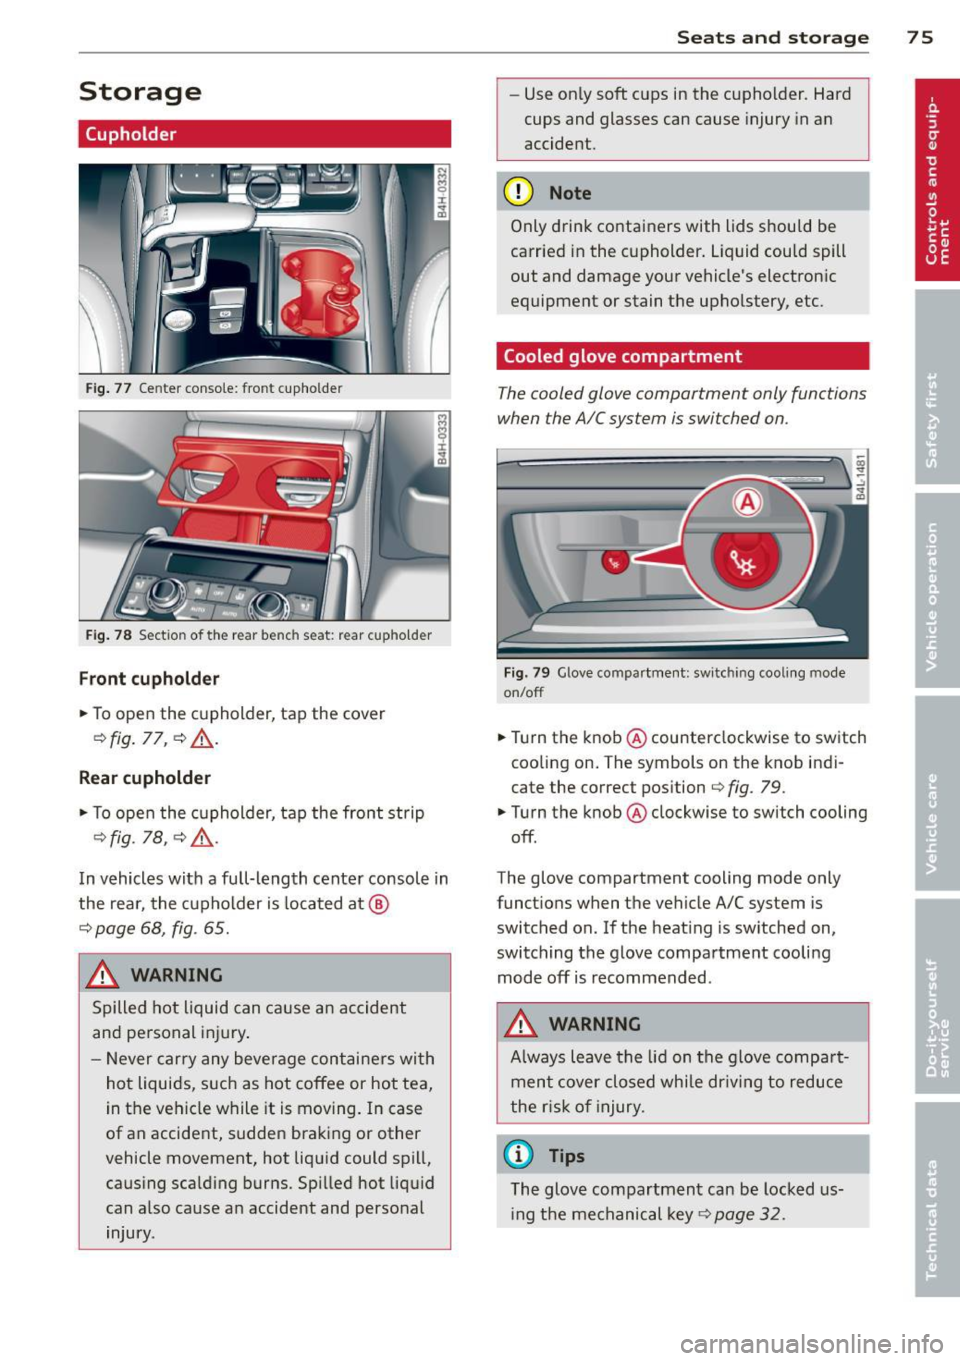 AUDI A8 2014  Owners Manual Storage 
(upholder 
Fig. 77  Center  console:  front cupho lder 
Fig. 78 Section  of  the rear  bench  seat:  rear  cupholder 
Front cupholder 
.,. To open  the  cupholder,  tap  the  cover 
Q fig . 7